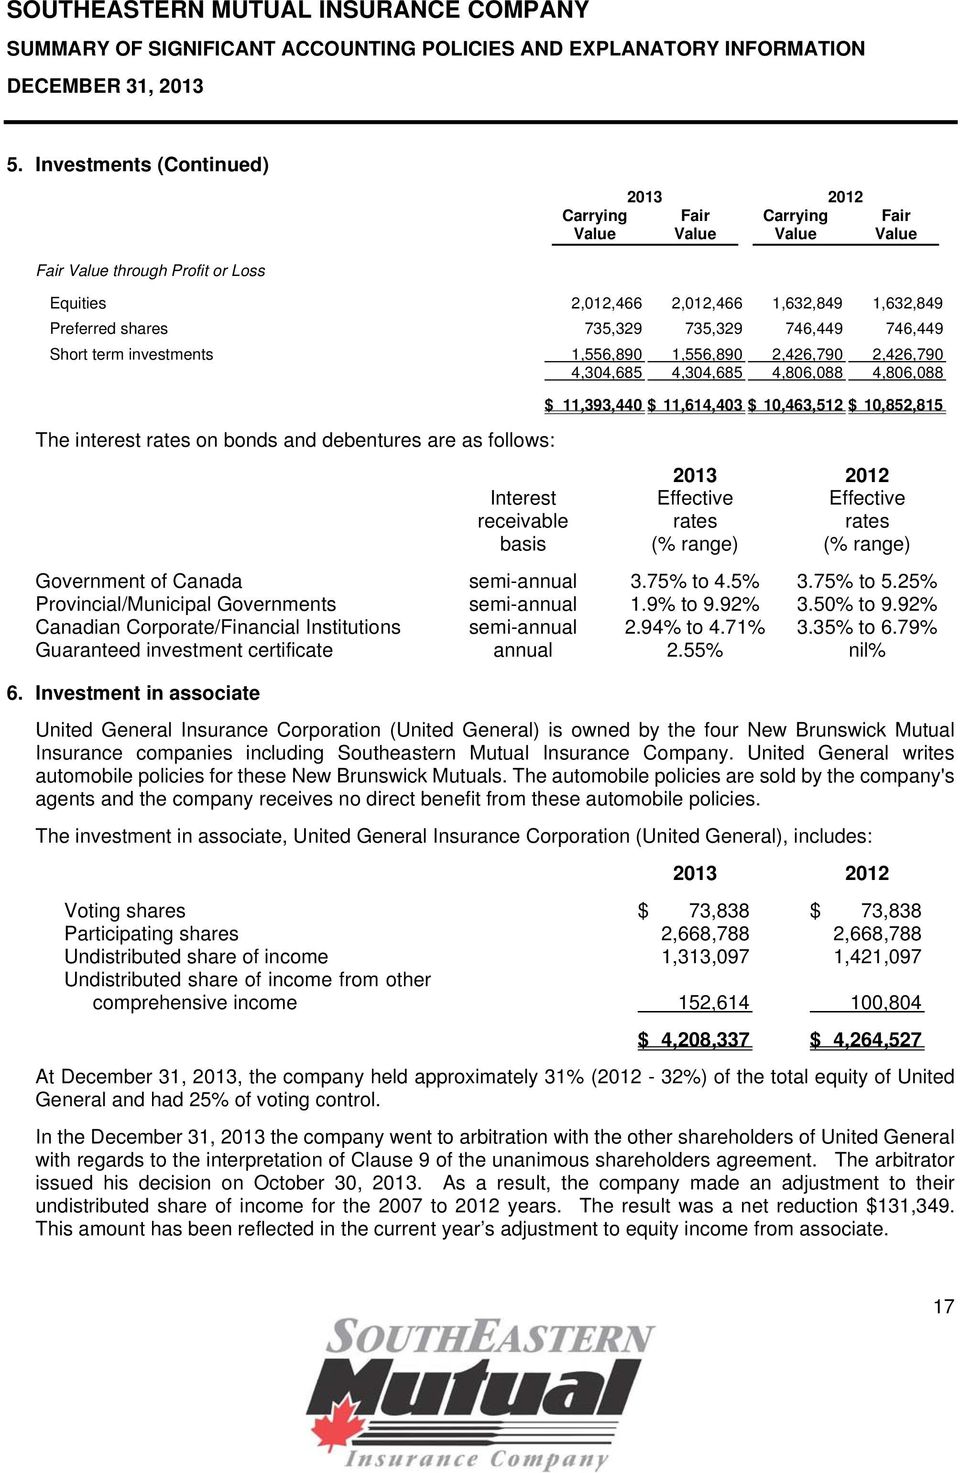 11,614,403 $ 10,463,512 $ 10,852,815 Interest Effective Effective receivable rates rates basis (% range) (% range) Government of Canada semi-annual 3.75% to 4.5% 3.75% to 5.